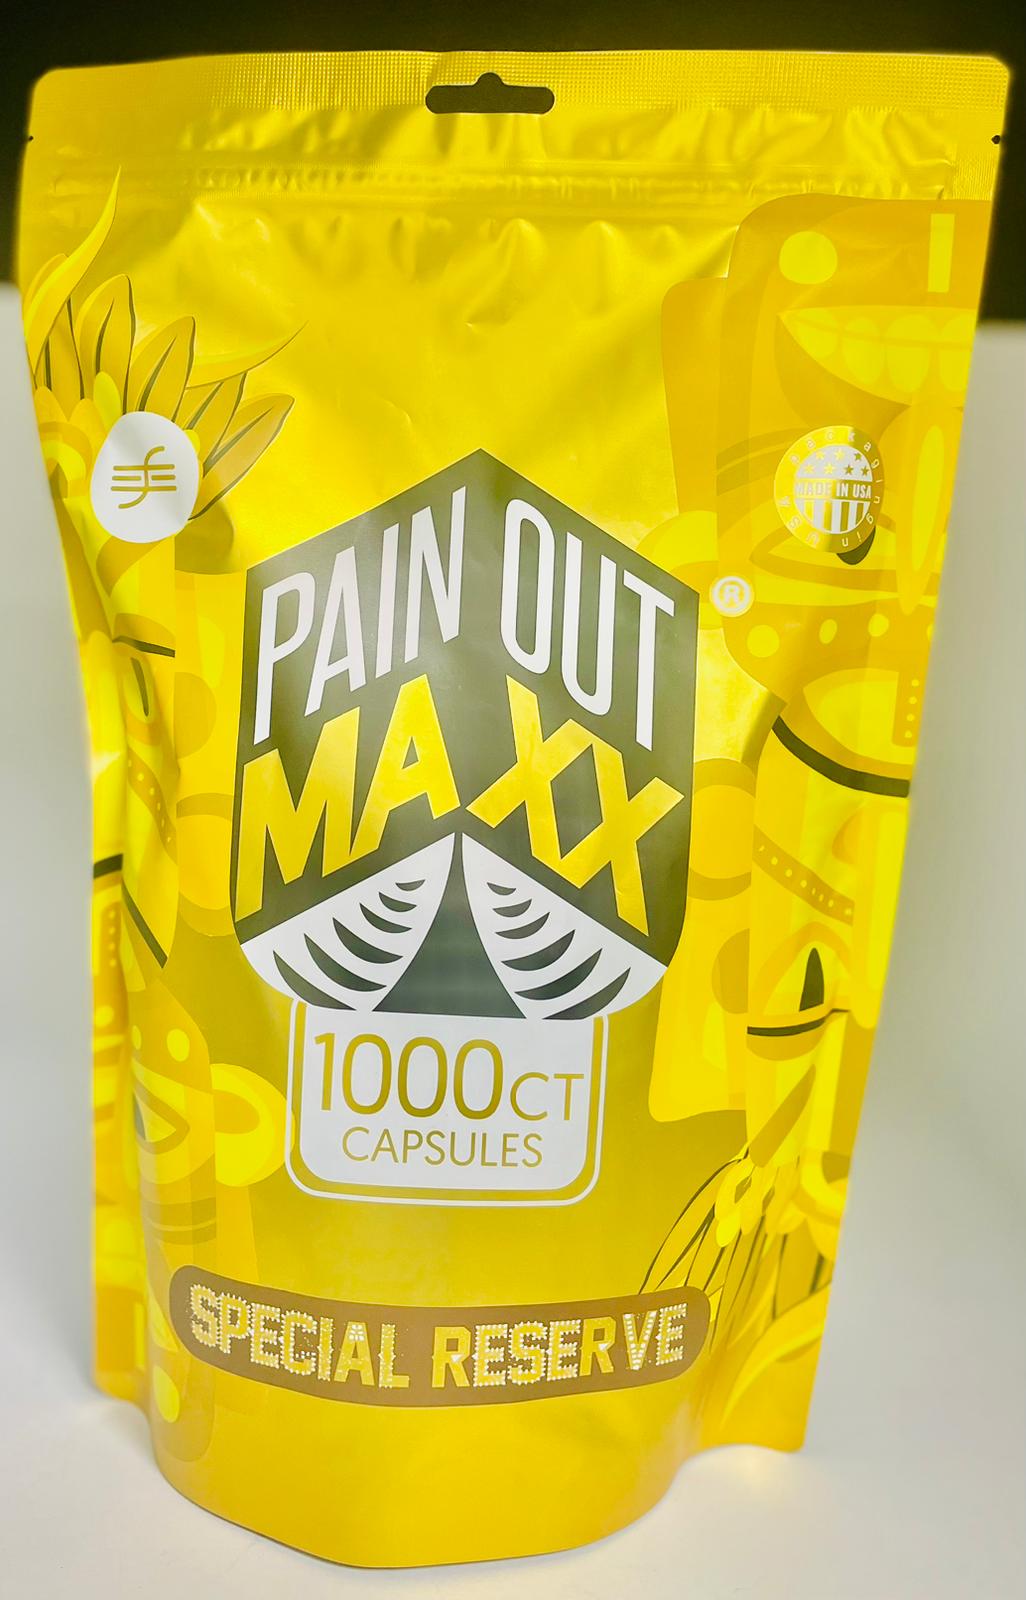 PAIN OUT MAXX KRATOM SPECIAL RESERVE CAPSULES